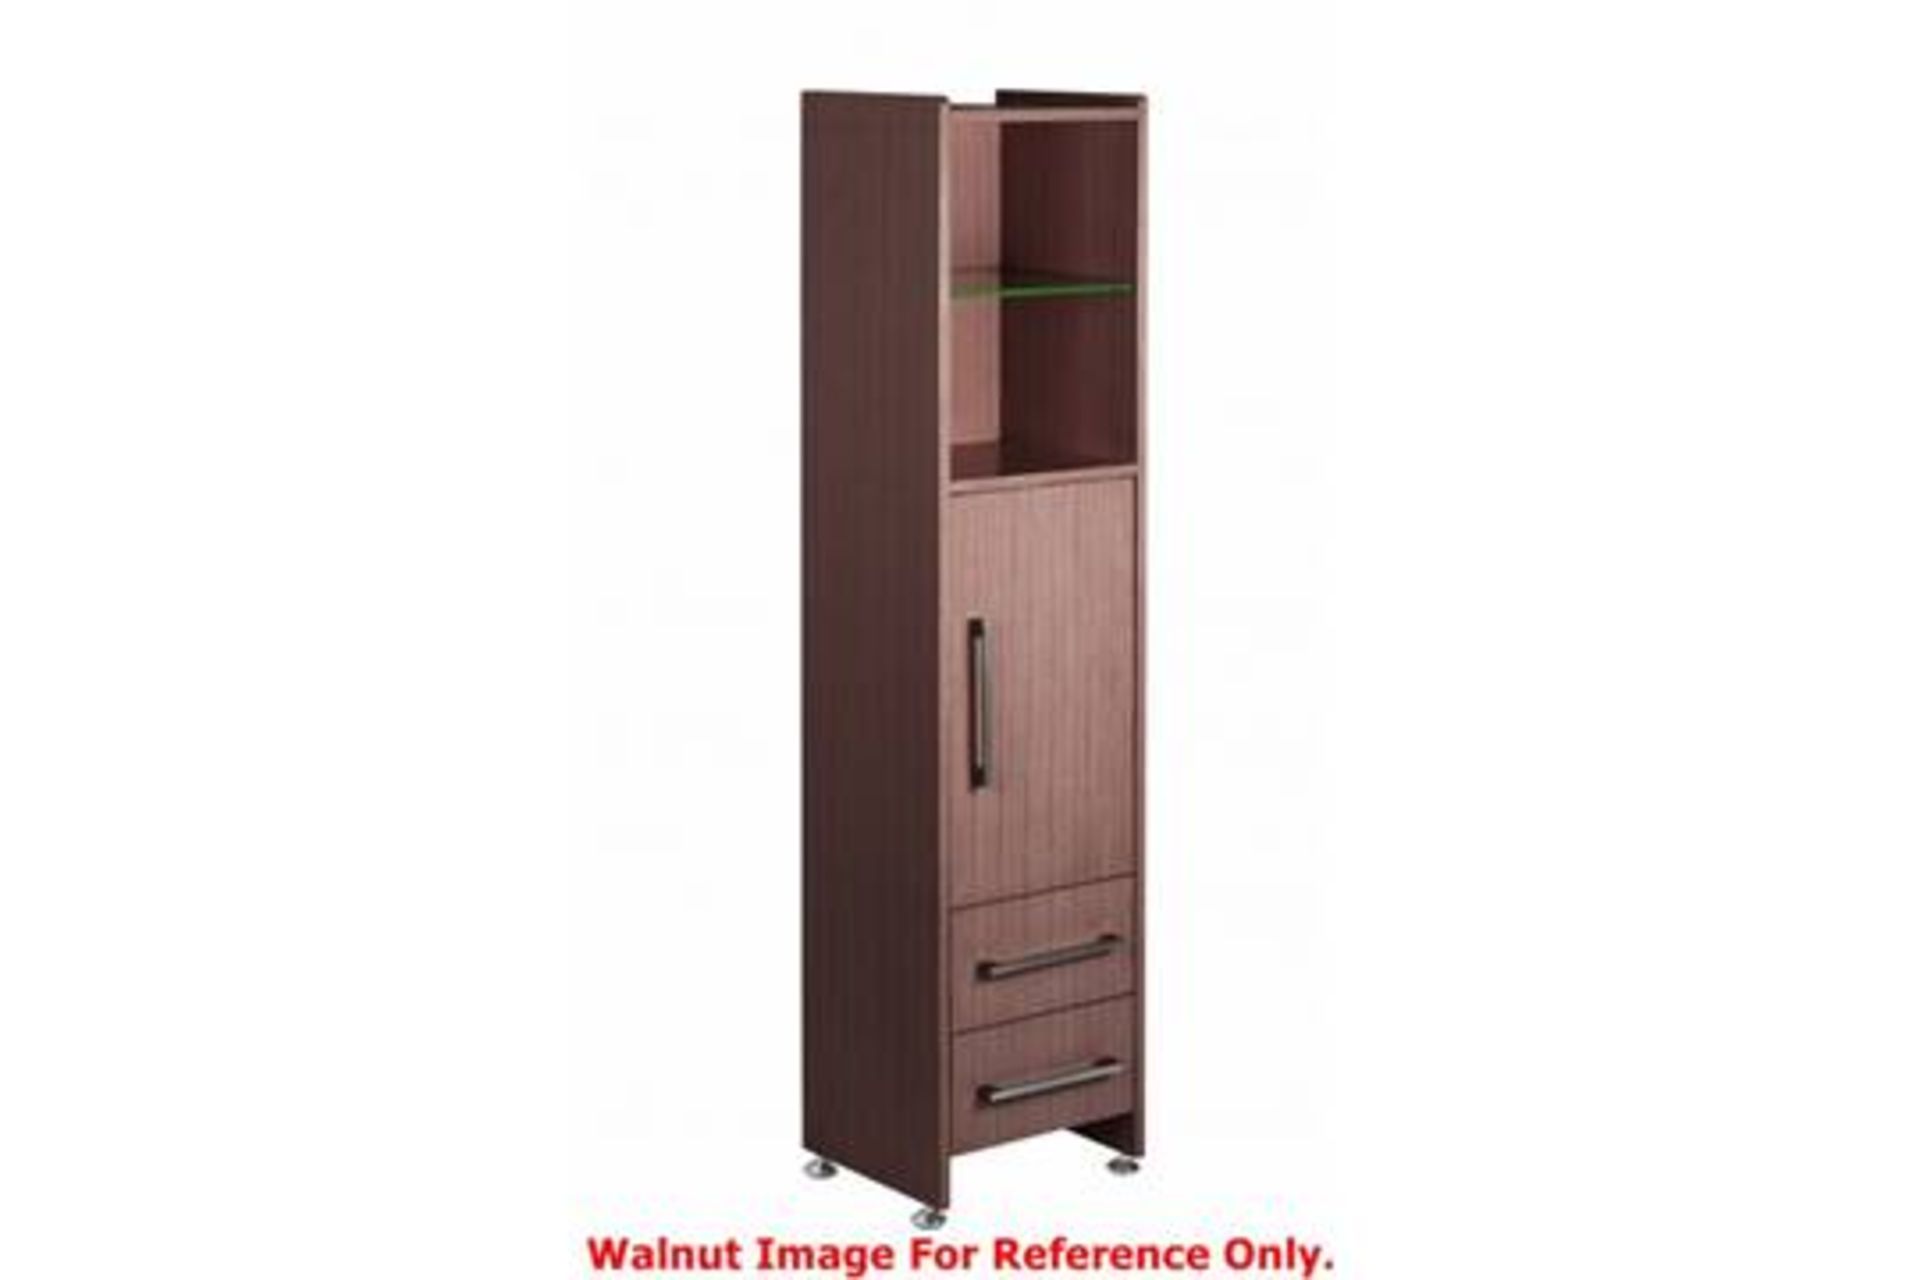 1 x Vogue ARC Bathroom Series 2 Tall Boy Unit - WENGE - Contemporary Design - Manufactured to the - Image 2 of 3